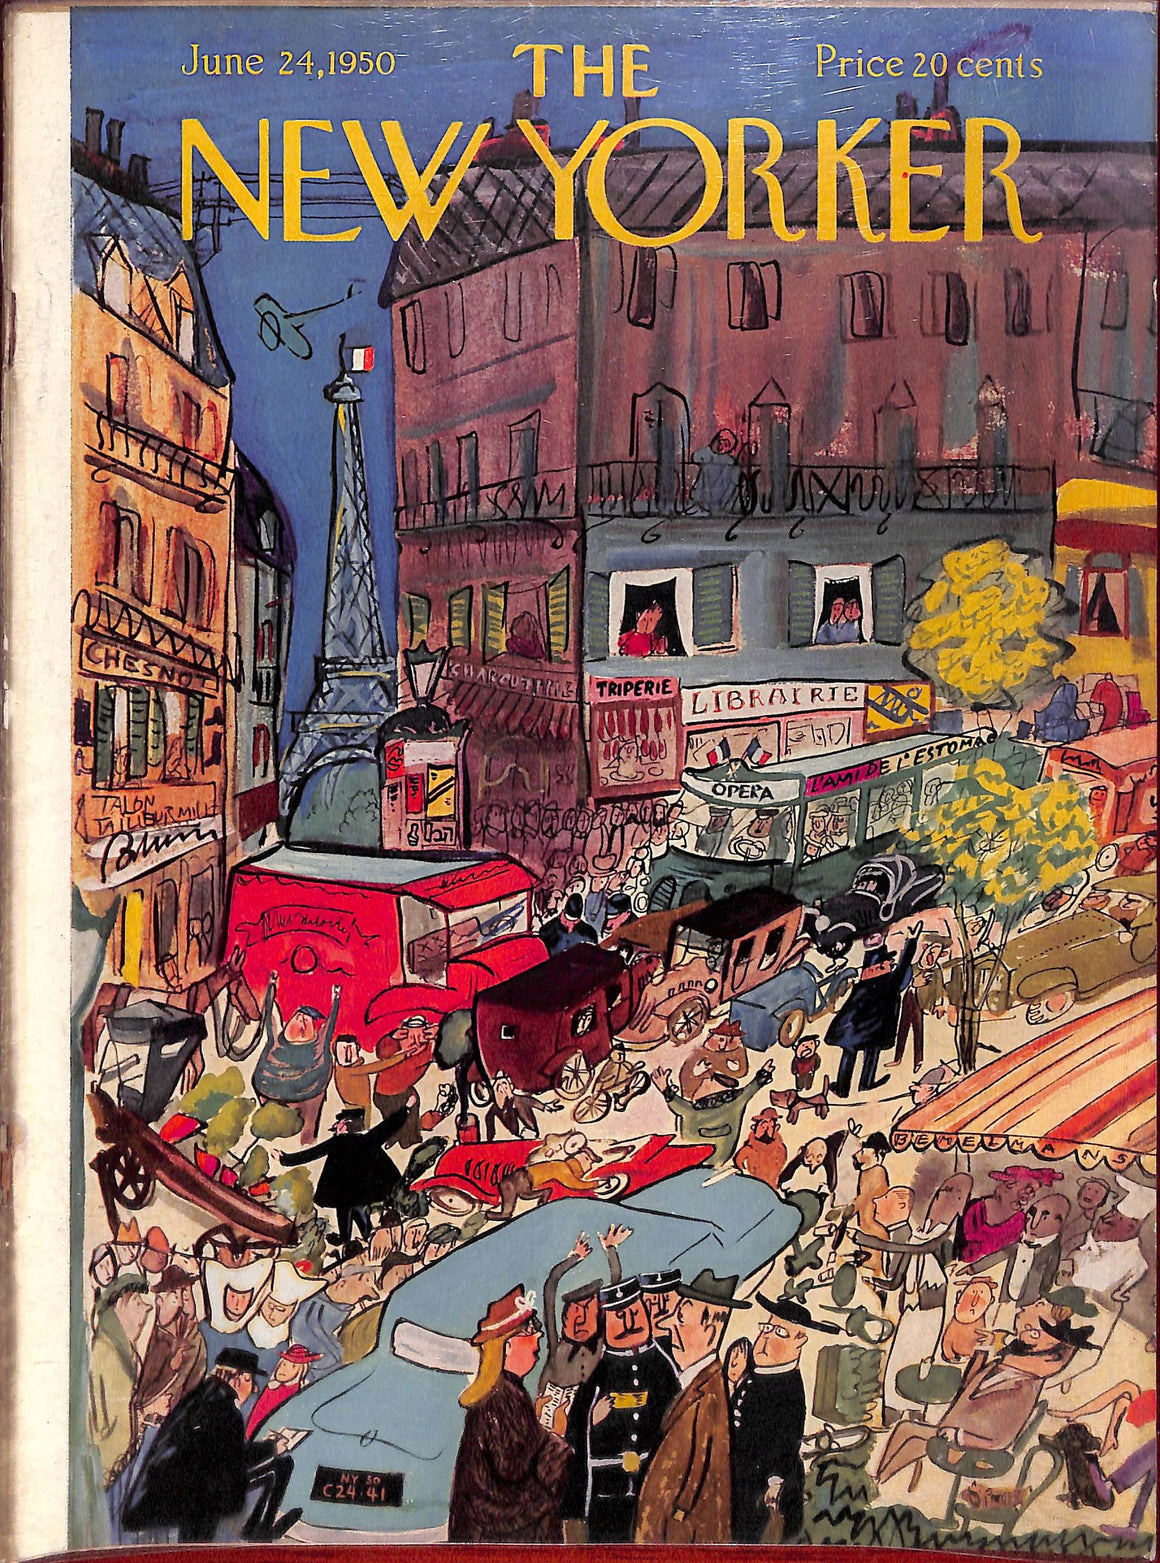 The New Yorker June 24, 1950 (SOLD)